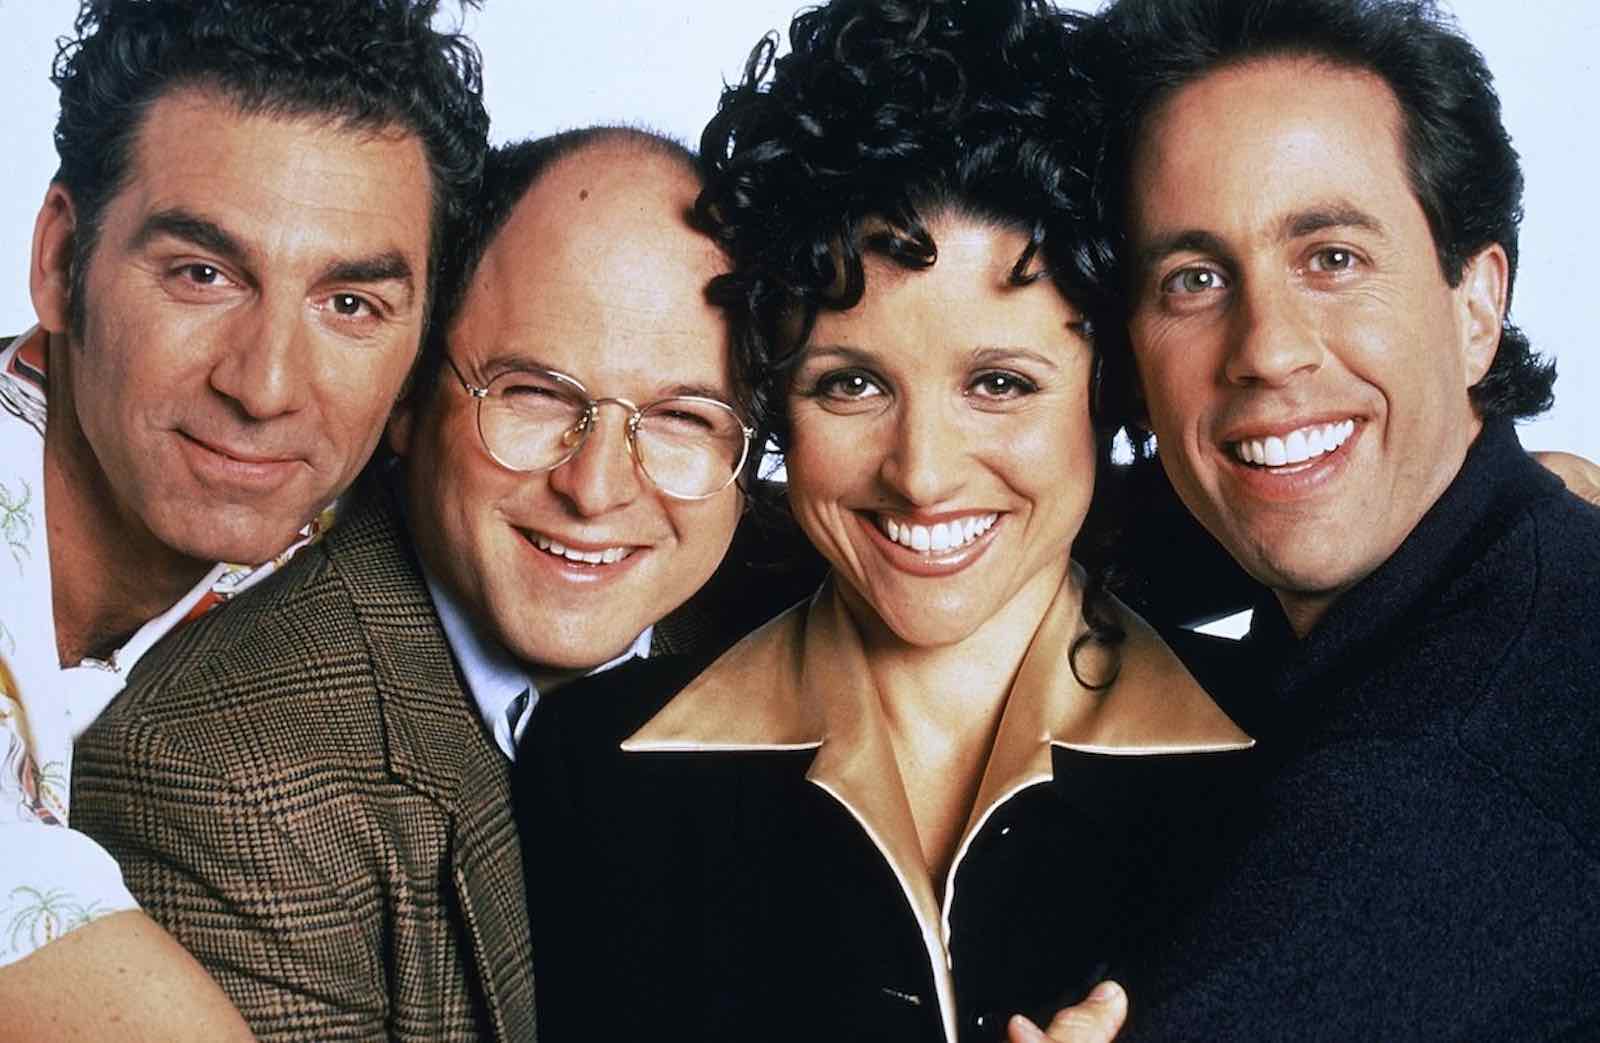 Despite instances of casual racism and sexism, 'Seinfeld' holds up years after its pilot aired. Here's why we're glad 'Seinfeld' cast its lot with Netflix.